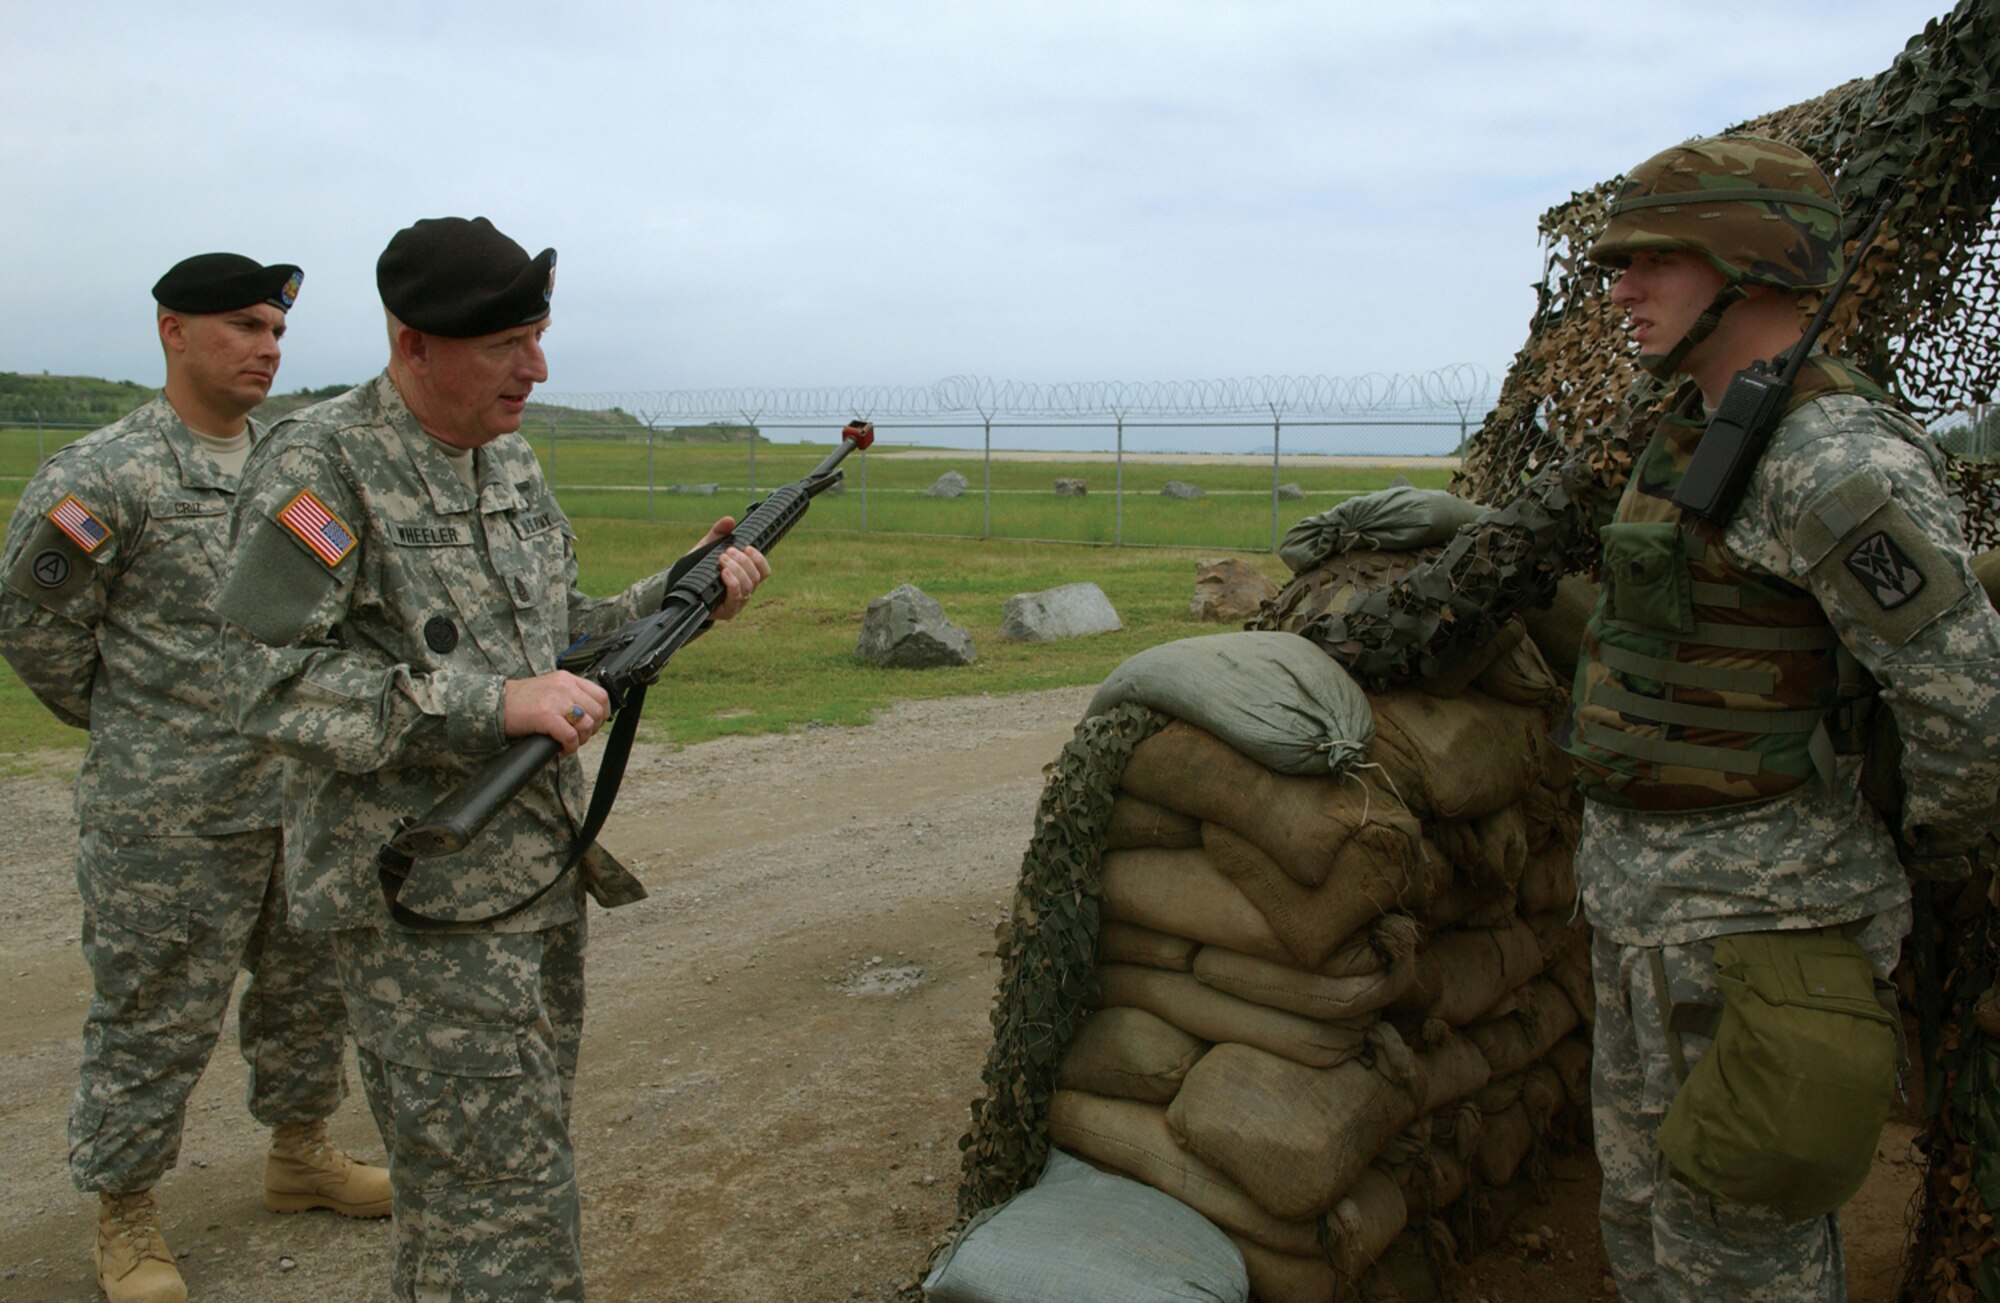 KUNSAN AIR BASE, Republic of Korea -- Sgt. Maj. Barry Wheeler, United States Forces Korea command sergeant major, reviews an air defense artillery soldier July 5. (Air Force photo by Staff Sgt. Josef Cole)                              